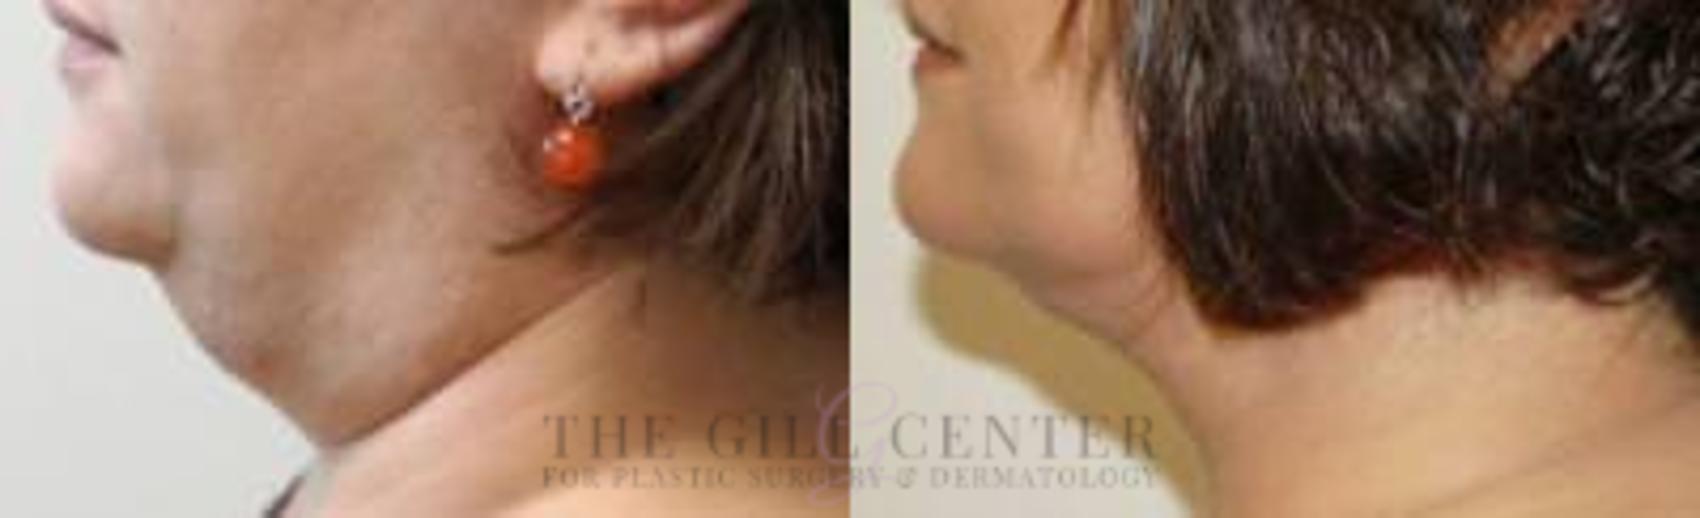 Neck Liposuction Case 367 Before & After Left Side | The Woodlands, TX | The Gill Center for Plastic Surgery and Dermatology